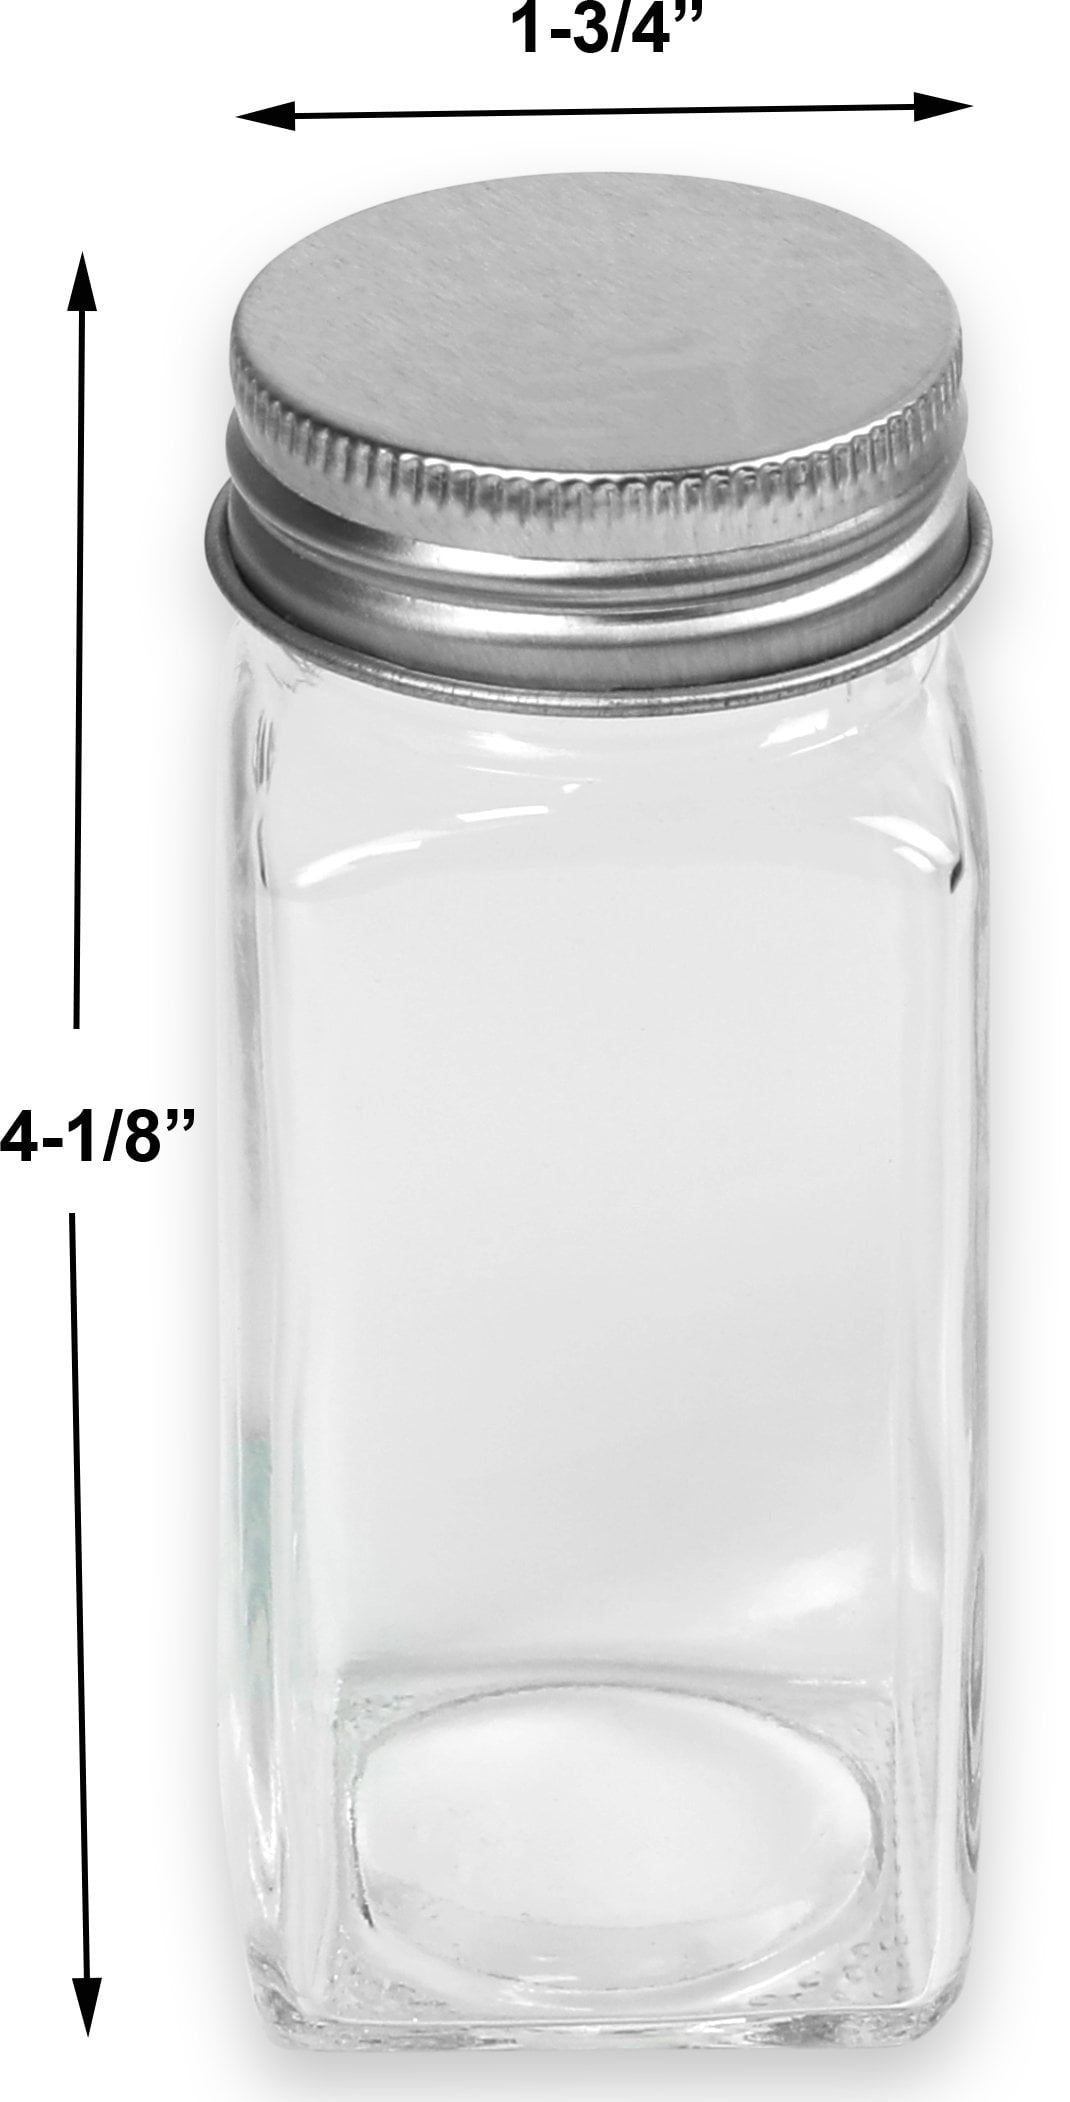  Spice Jars, SPANLA 12 Pack 4oz Small Glass Jars with